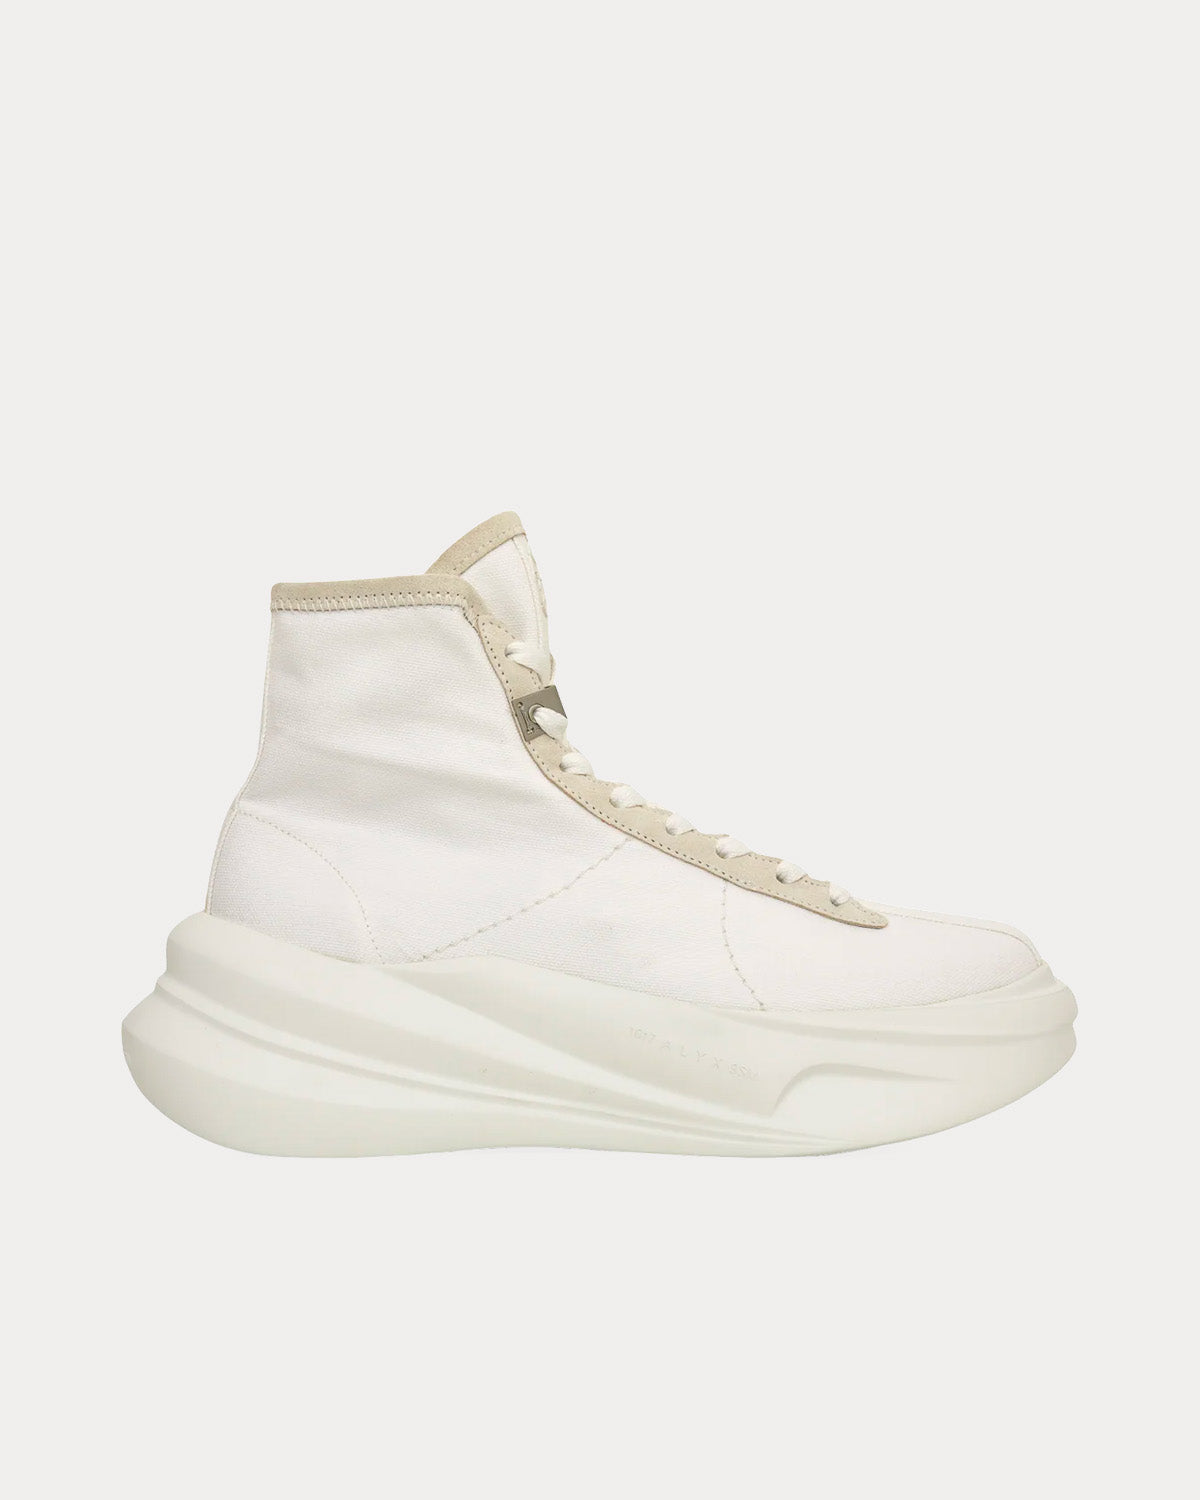 1017 ALYX 9SM - Aria Canvas White High Top Sneakers